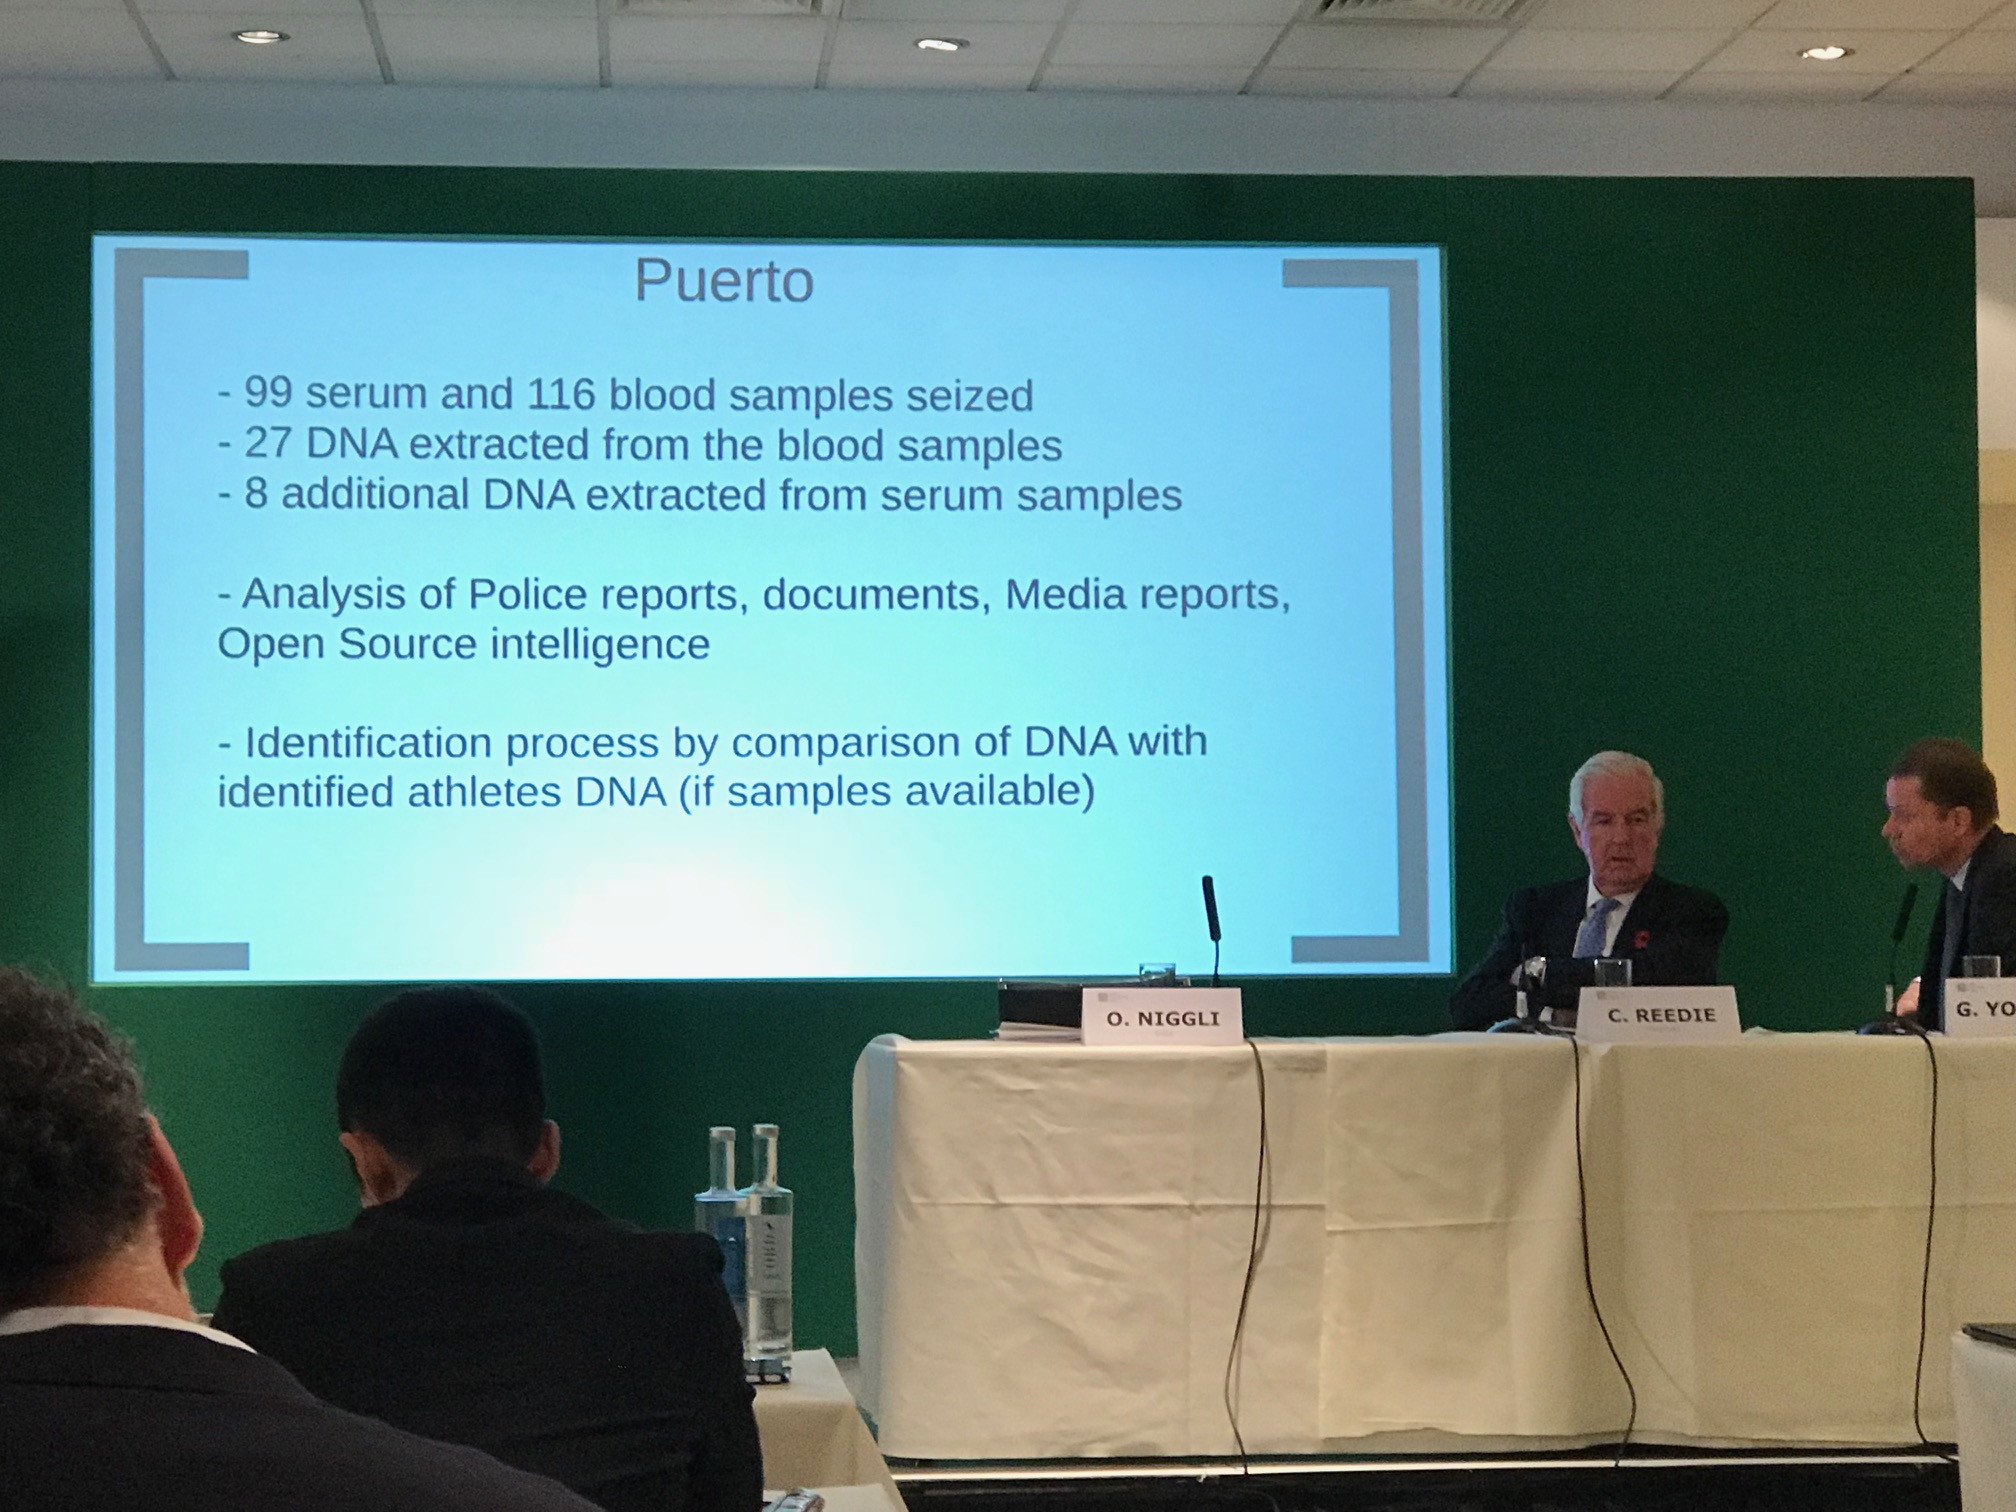 Günter Younger gave a presentation on the department's ongoing investigations, including Operation Puerto ©ITG